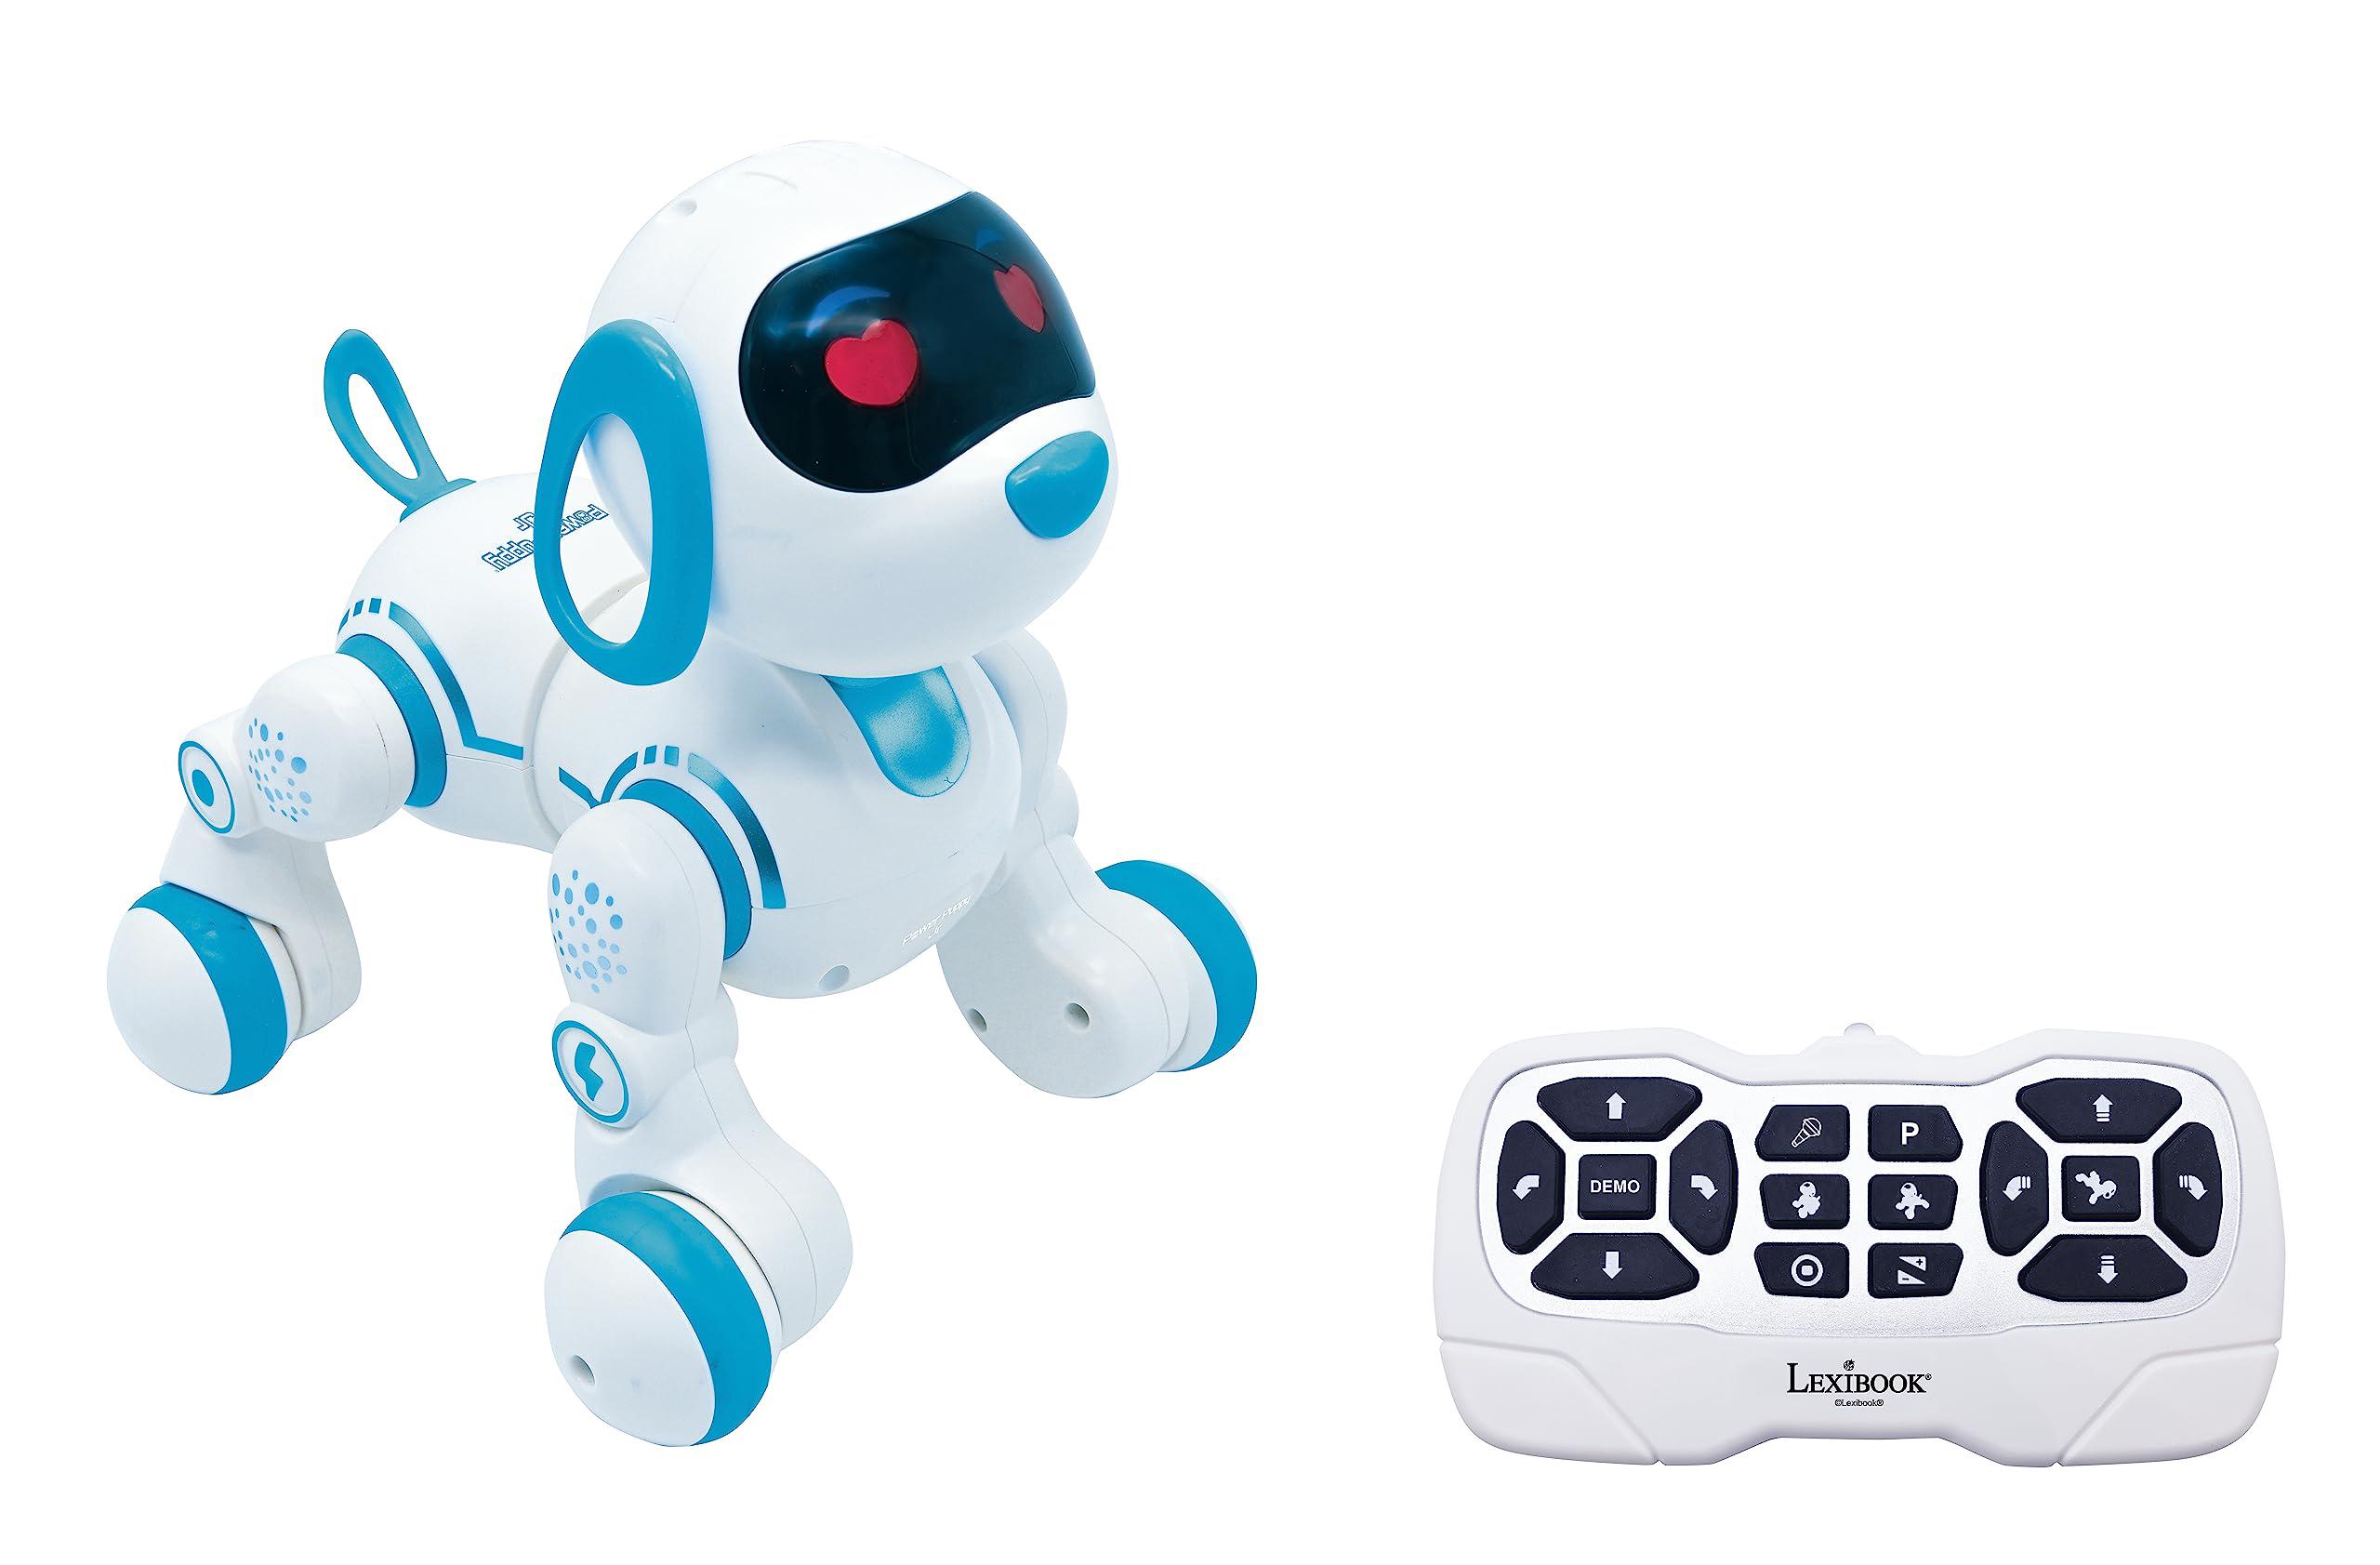 lexibook power puppy jr - my little robot dog - robot dog with sounds, music, light effects - barks and walks like a real dog